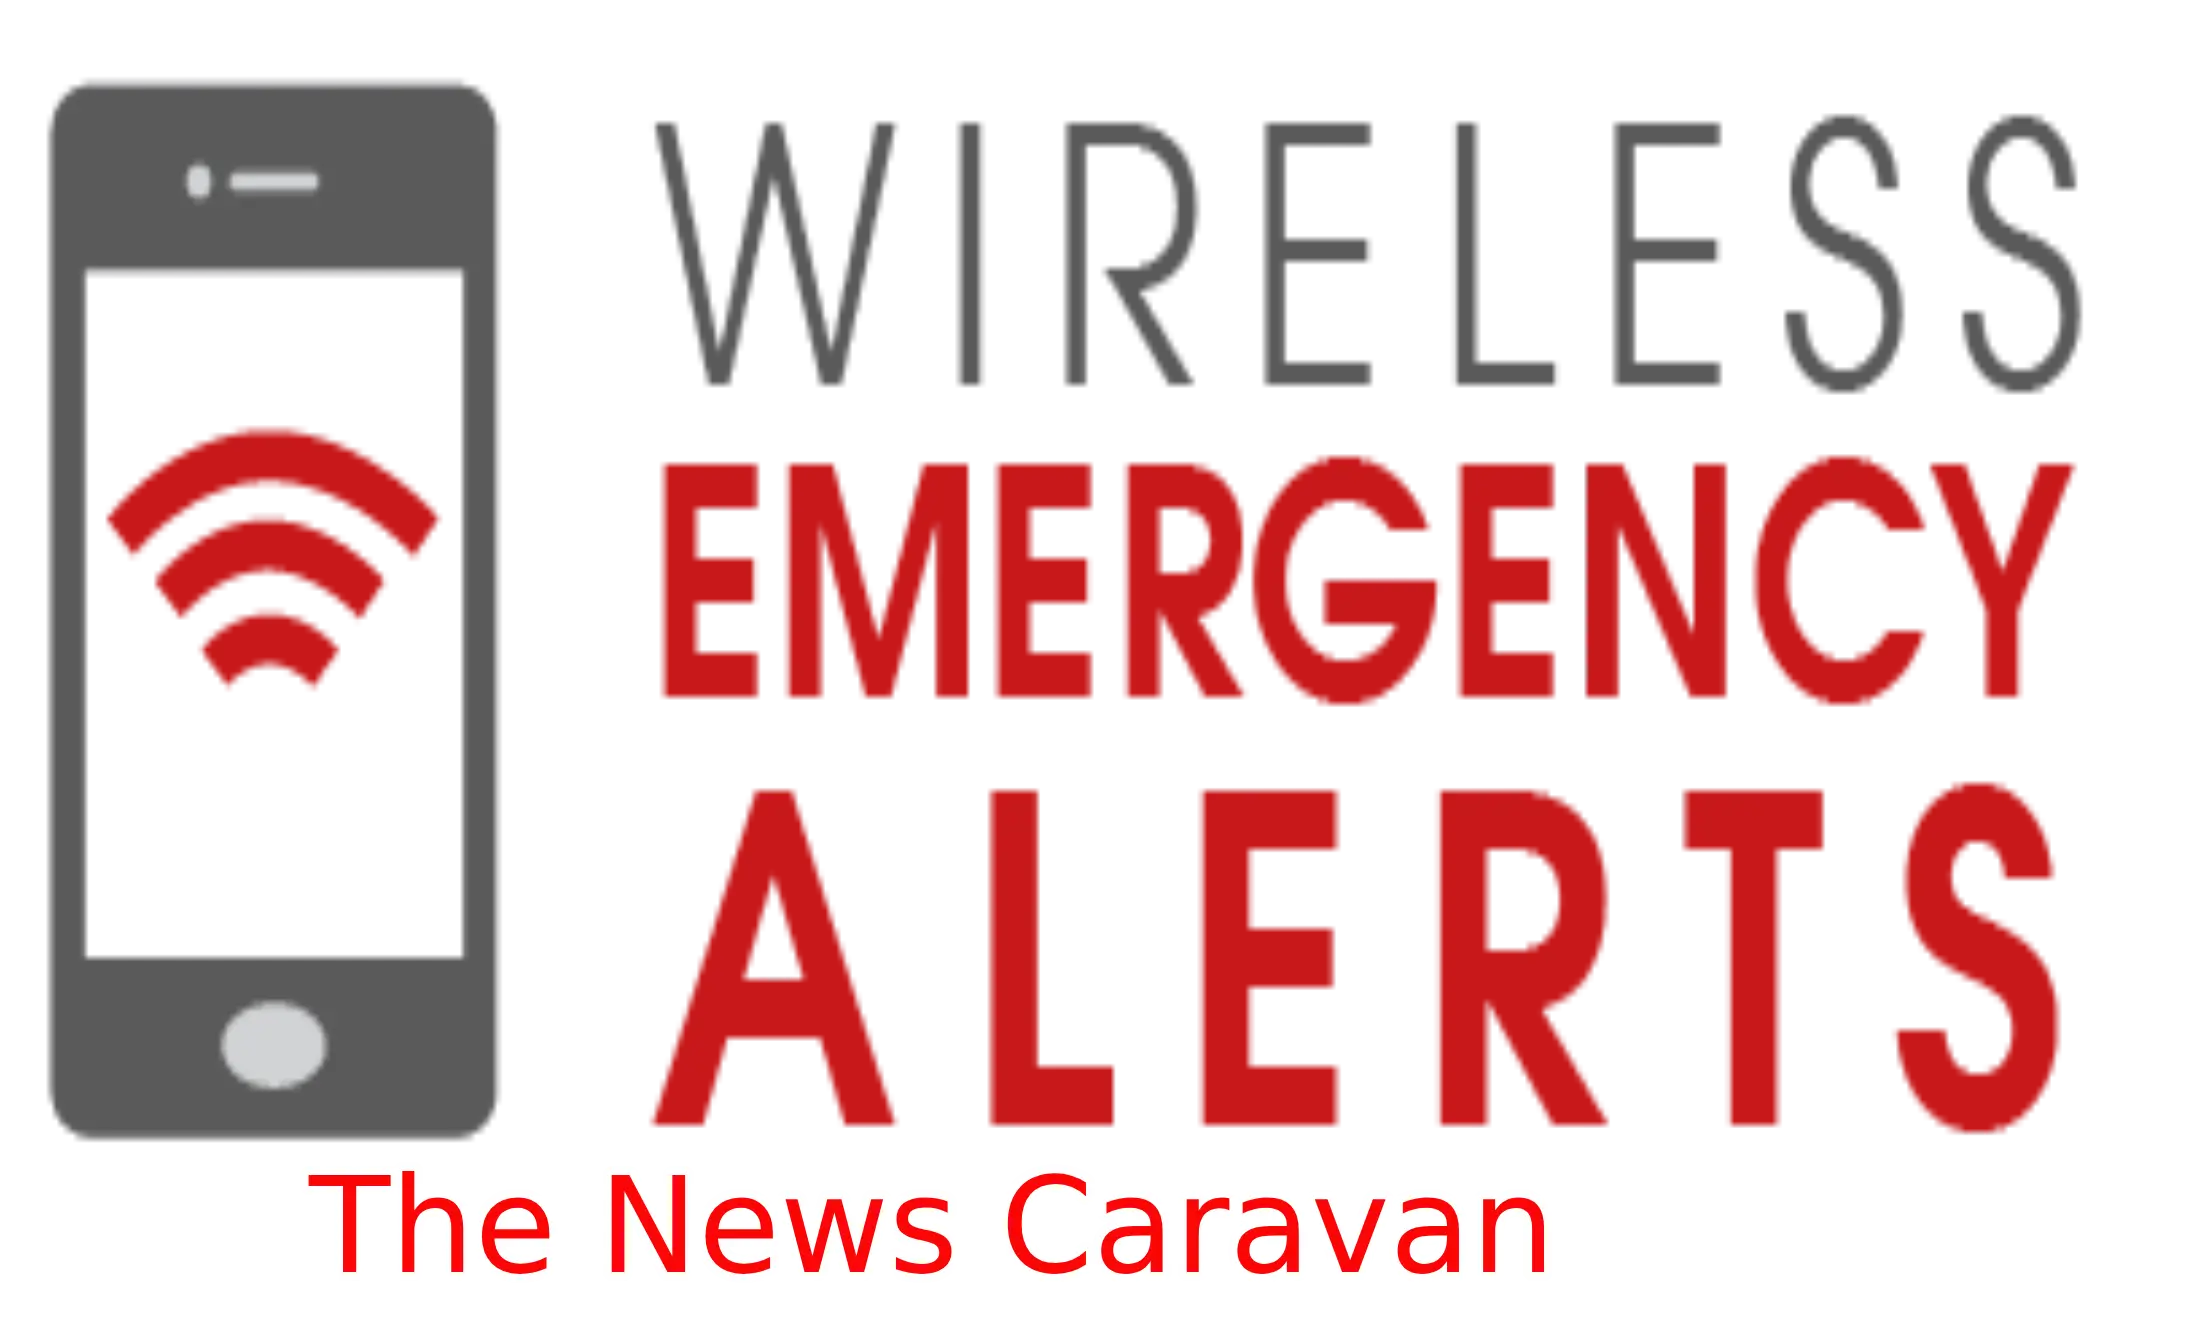 Stay informed and safe with wireless emergency alerts. Government bodies broadcast critical messages during emergencies and natural calamities to keep citizens updated. Find out why enabling this feature on your smartphone is crucial for your safety. Learn how to disable wireless emergency alerts if necessary.